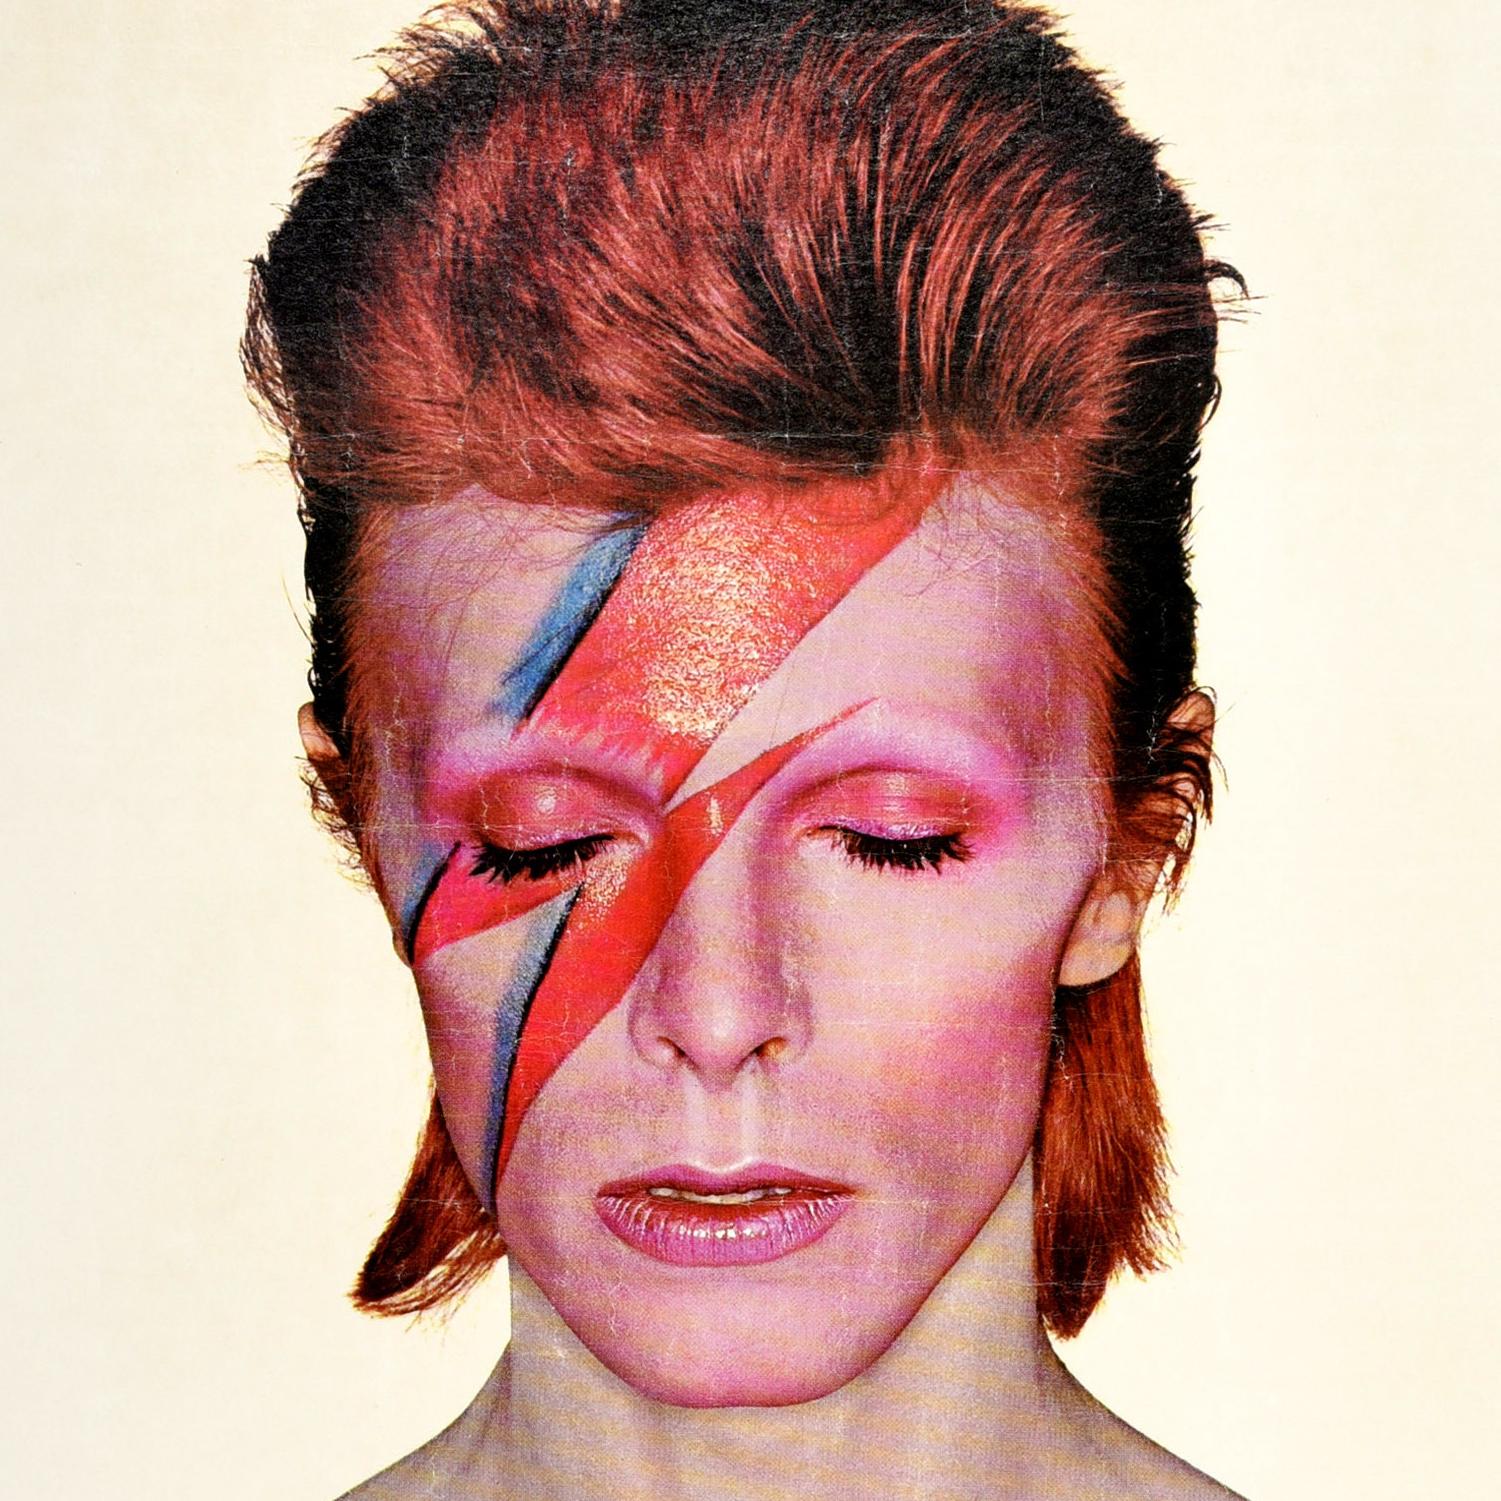 Original vintage music advertising poster for the David Bowie album Aladdin Sane released in 1973 featuring the iconic cover artwork by the English photographer Brian Duffy (1933-2010) of Bowie with red hair and his eyes closed, a red and blue